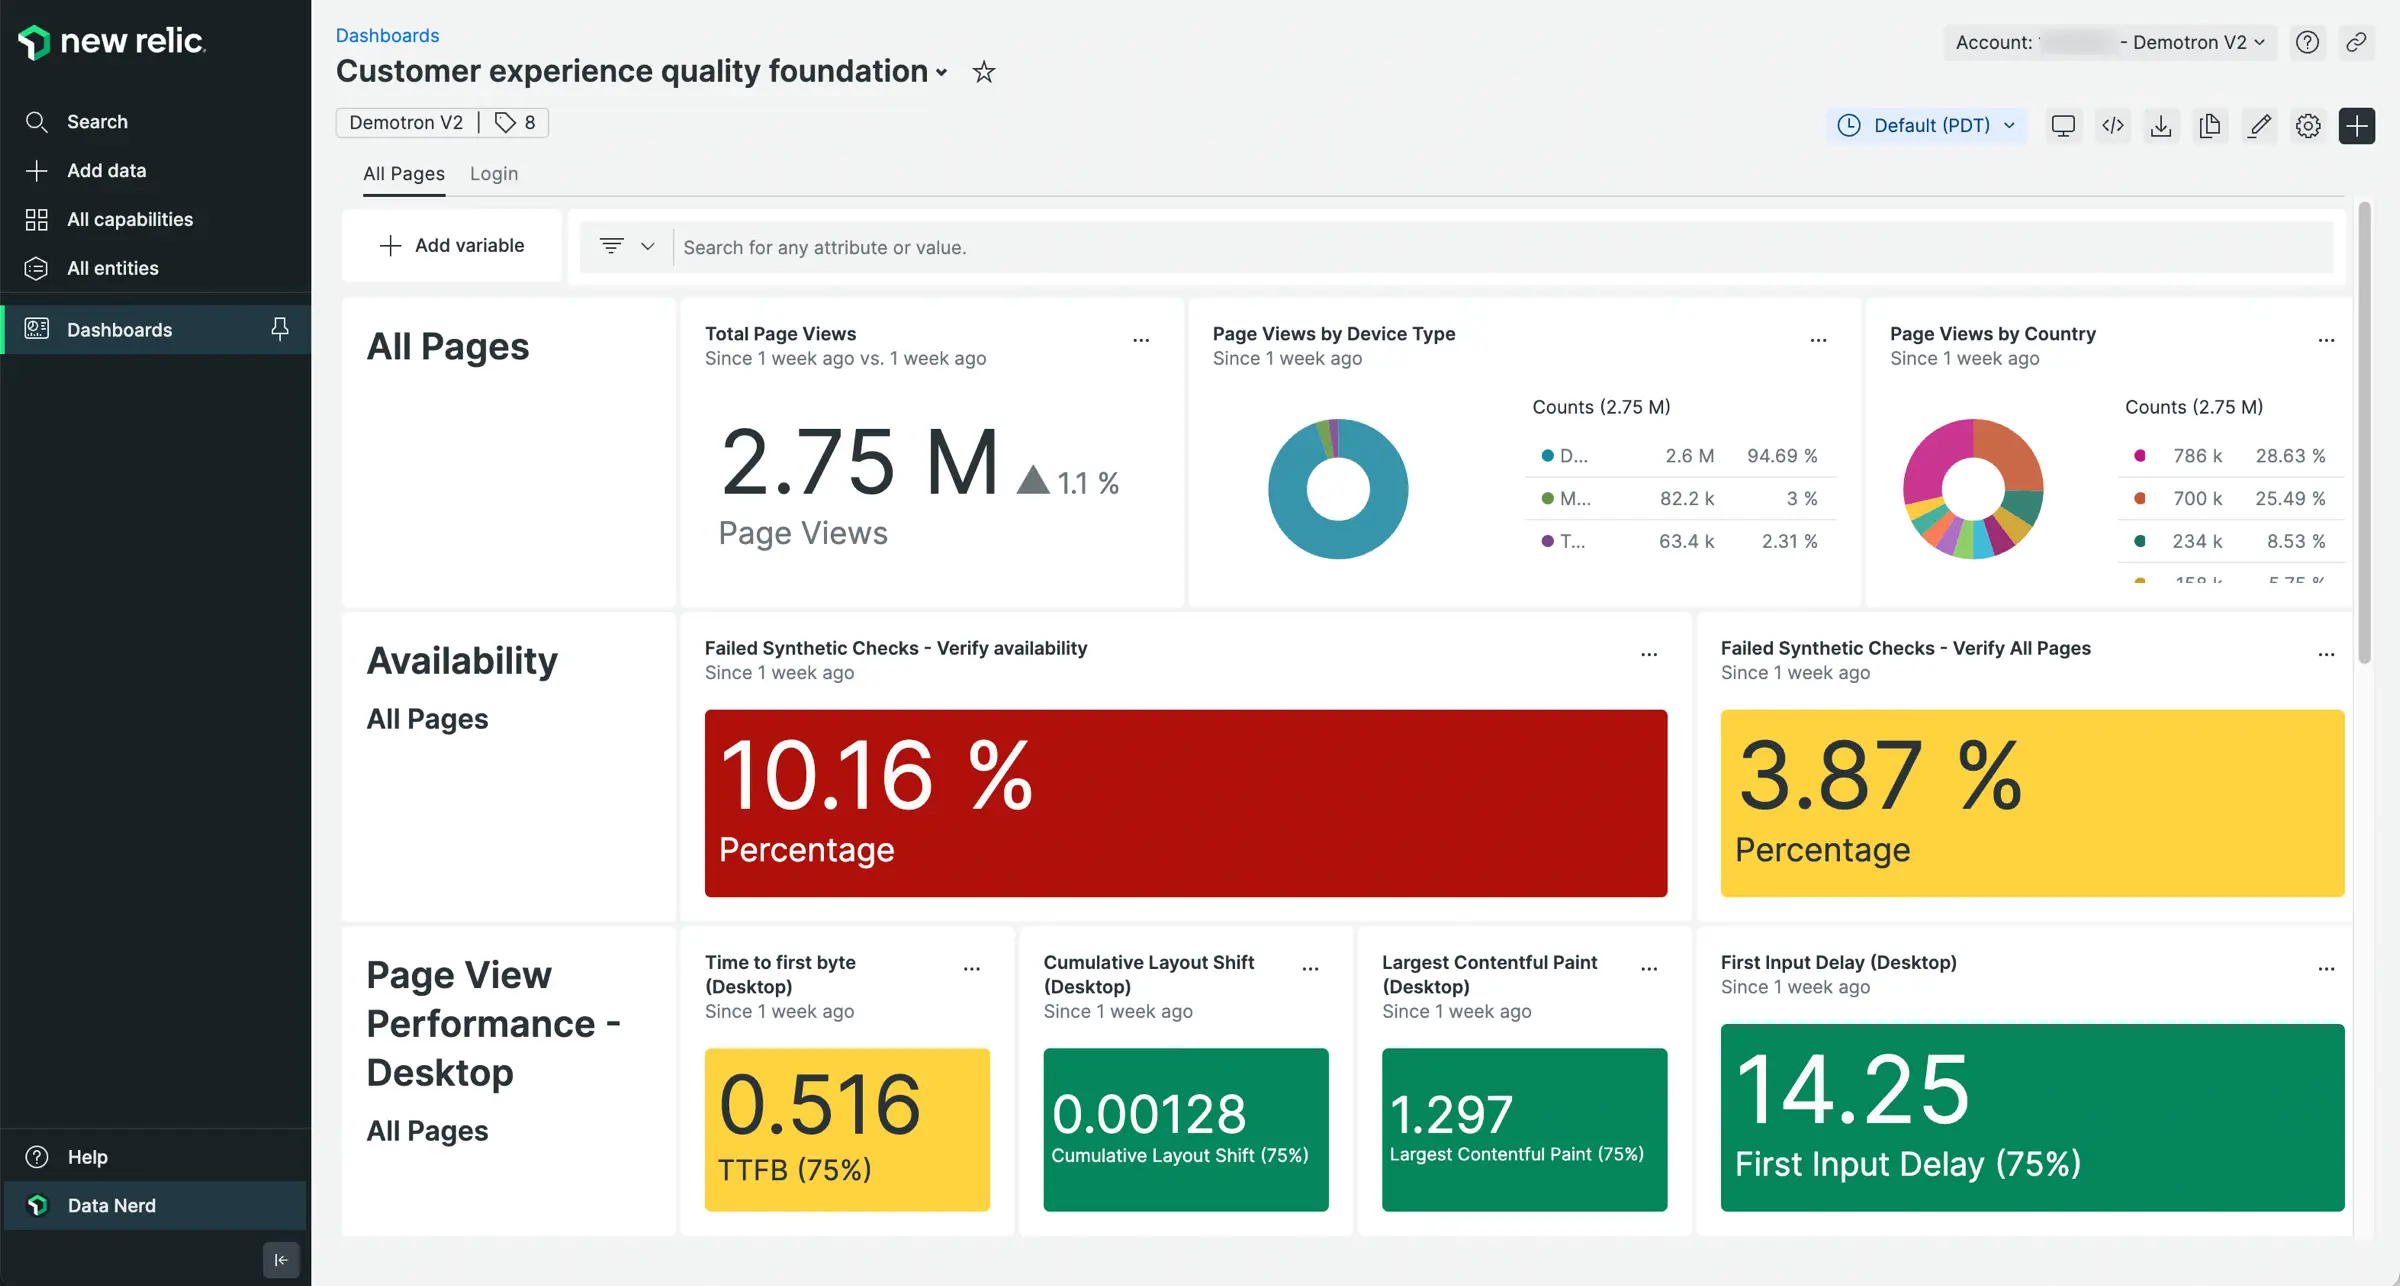 Customer experience quality foundation dashboard